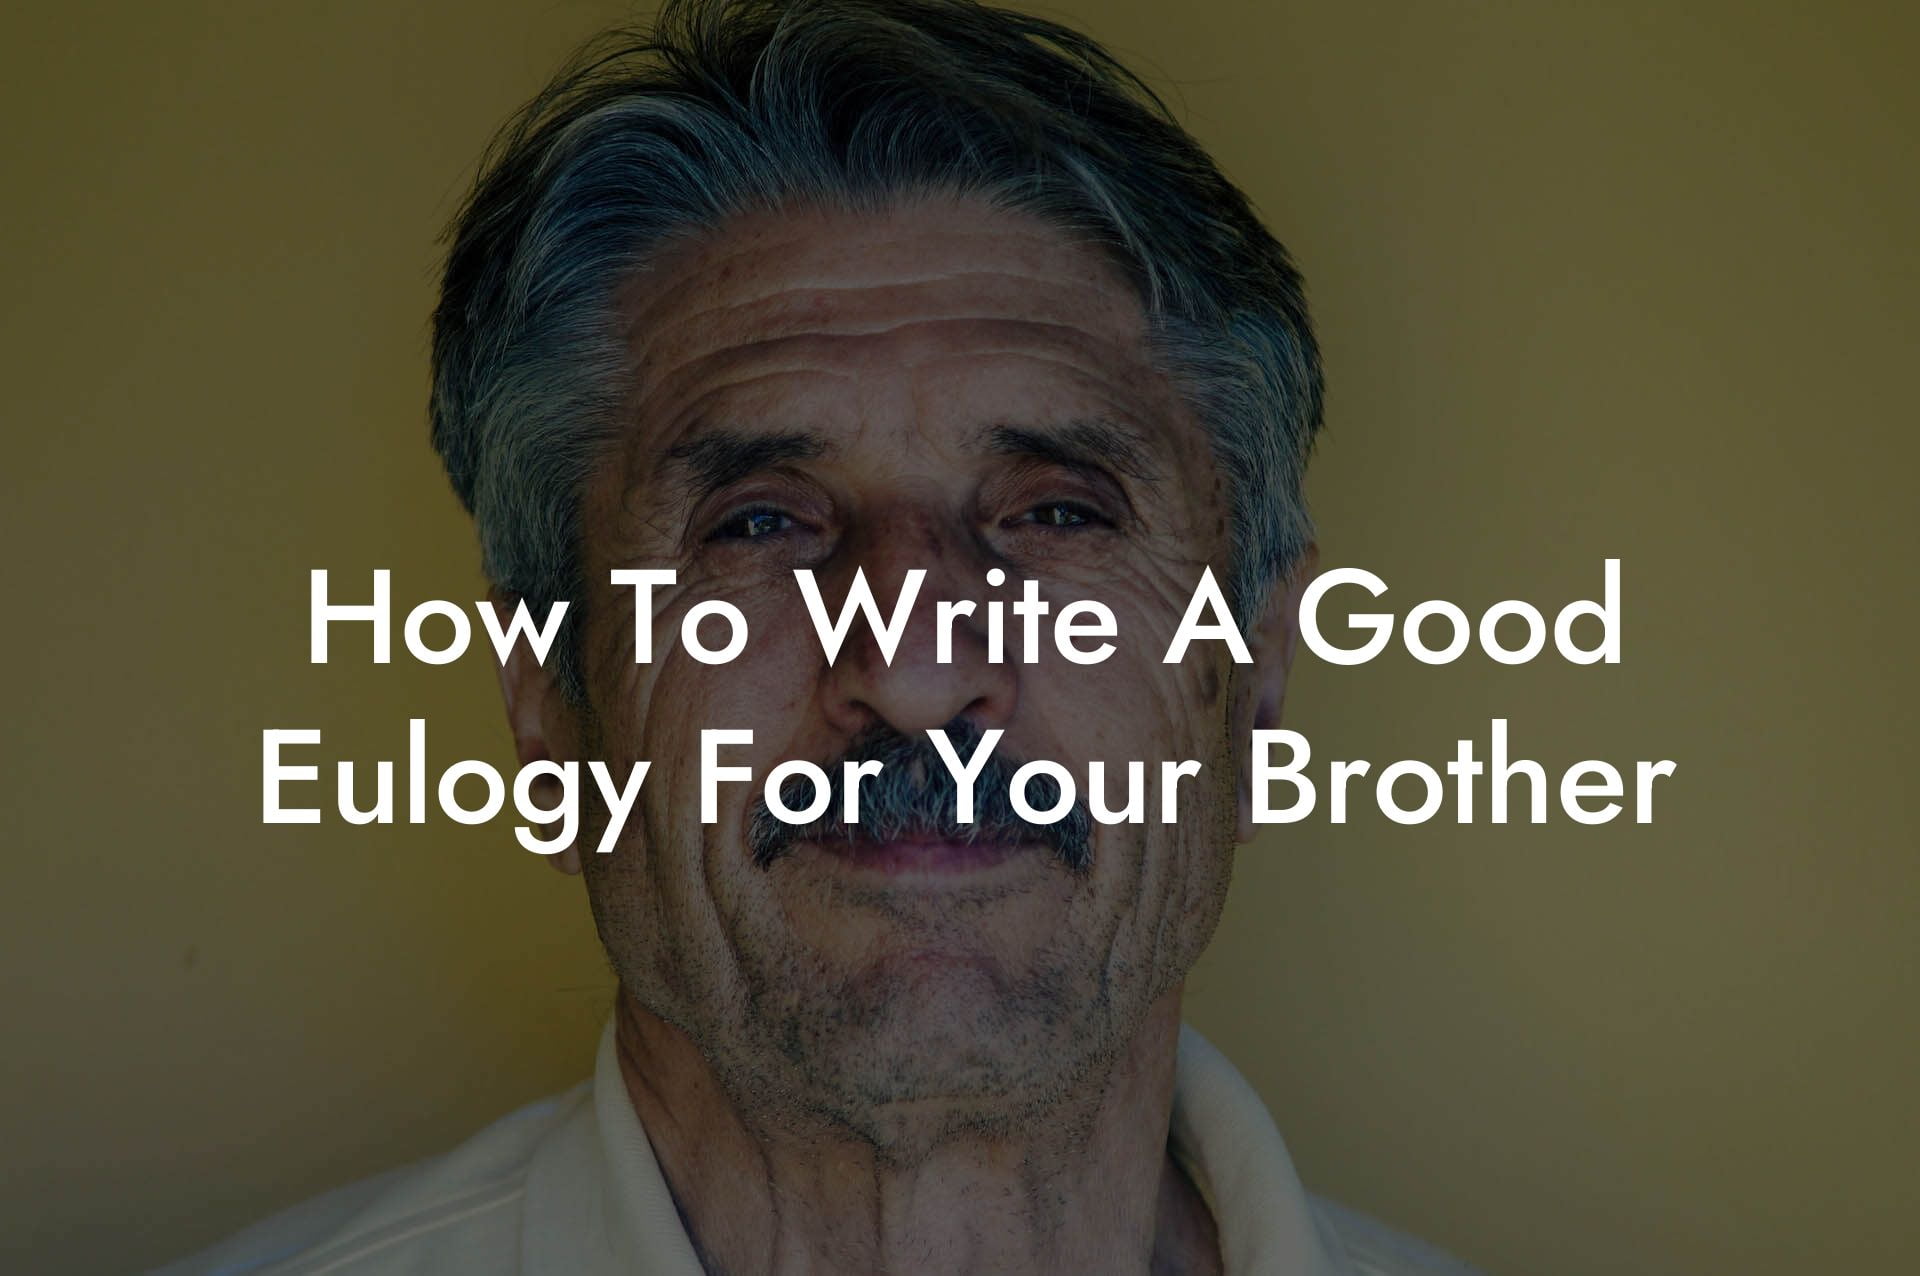 How To Write A Good Eulogy For Your Brother